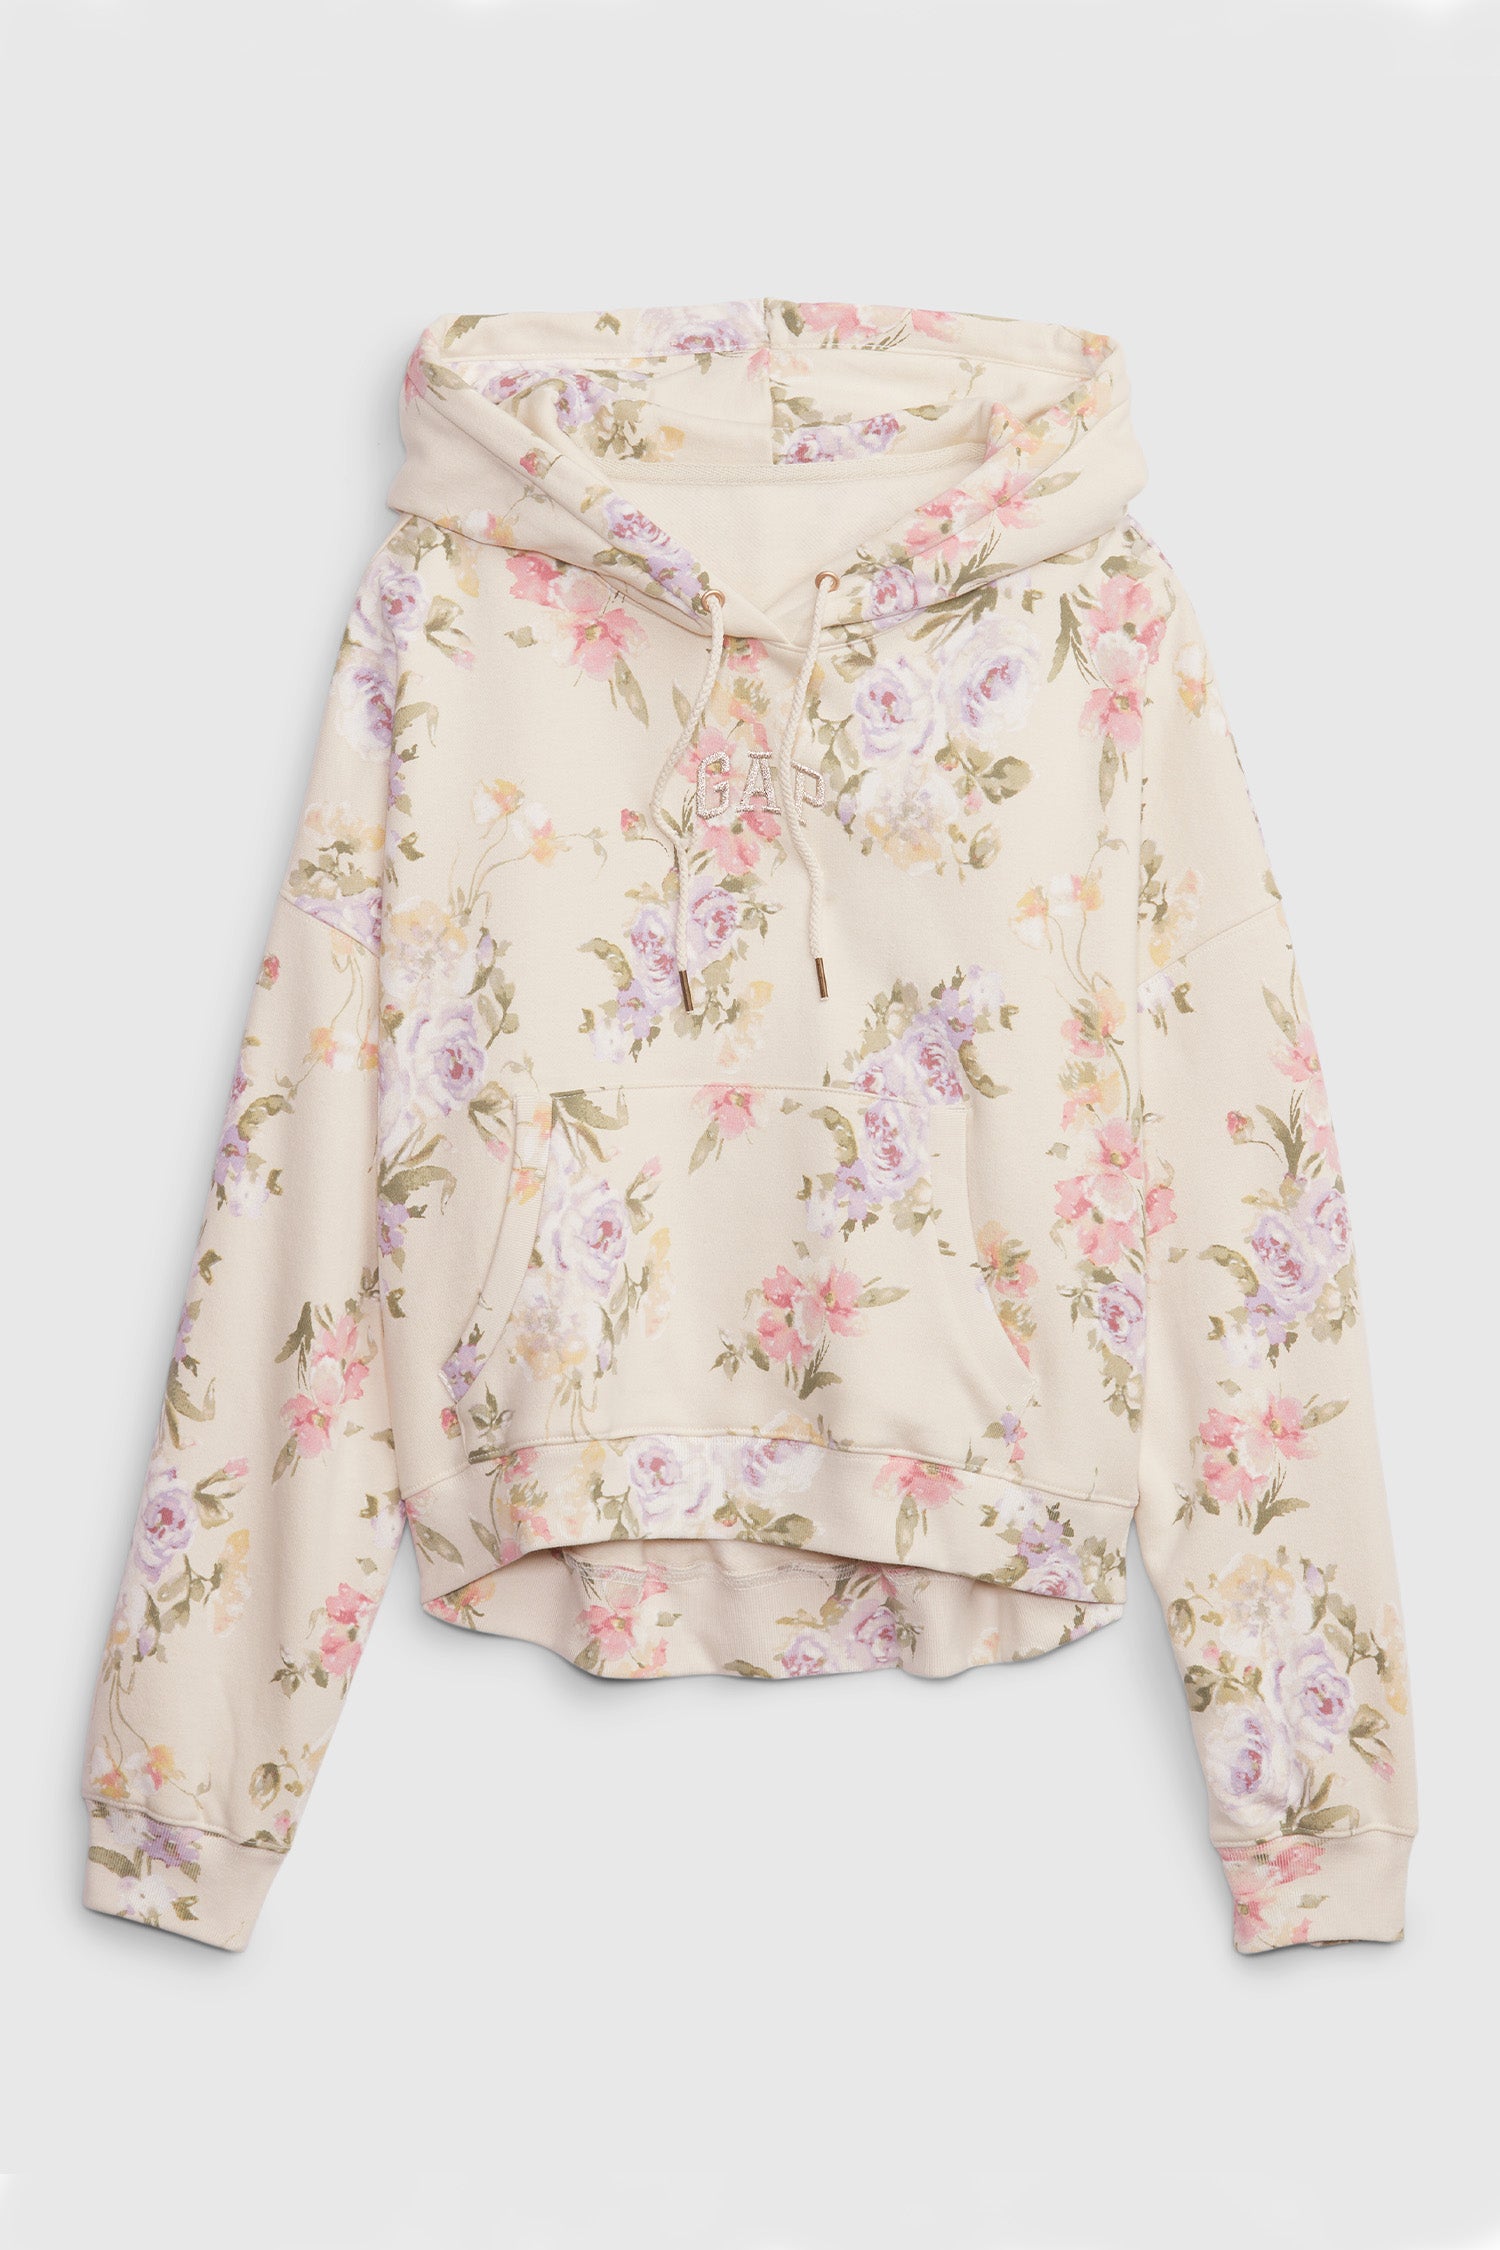 Cream floral hoodie with GAP arch logo on chest and pink, purple, and green floral print